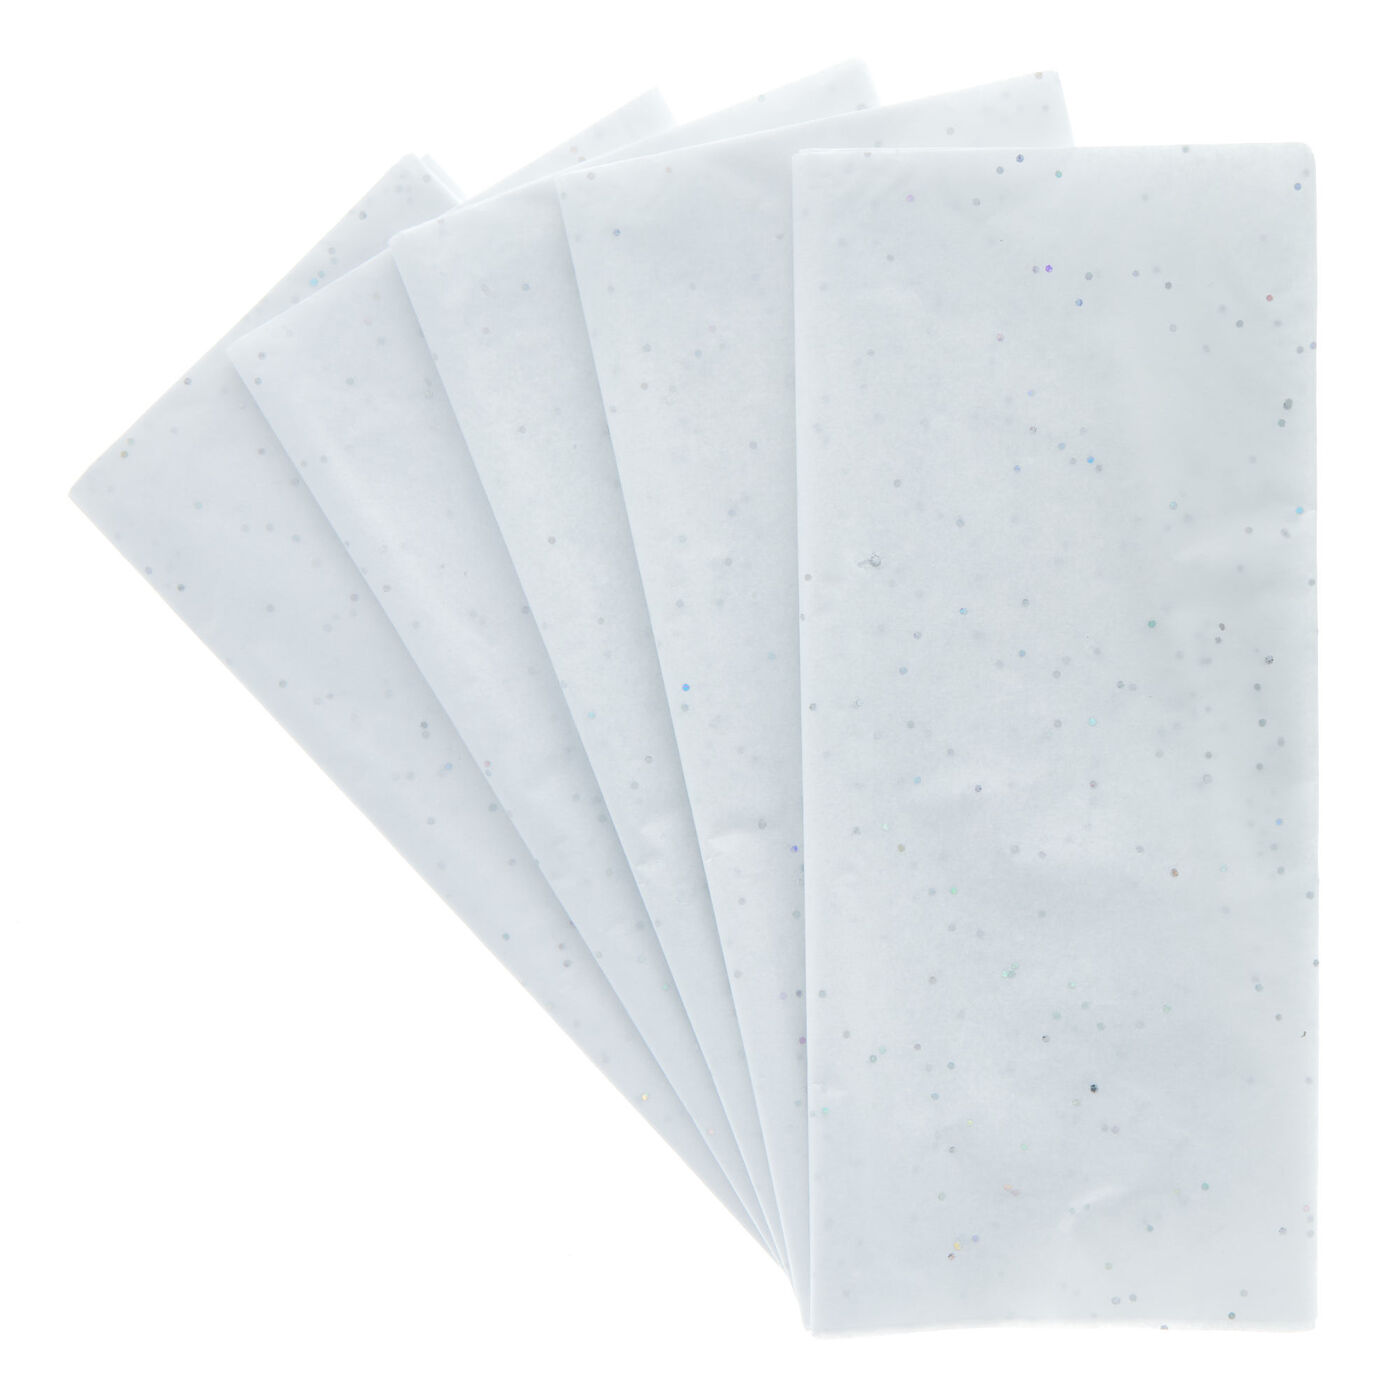 Buy Silver Glitter Tissue Paper - 6 Sheets for GBP 1.99